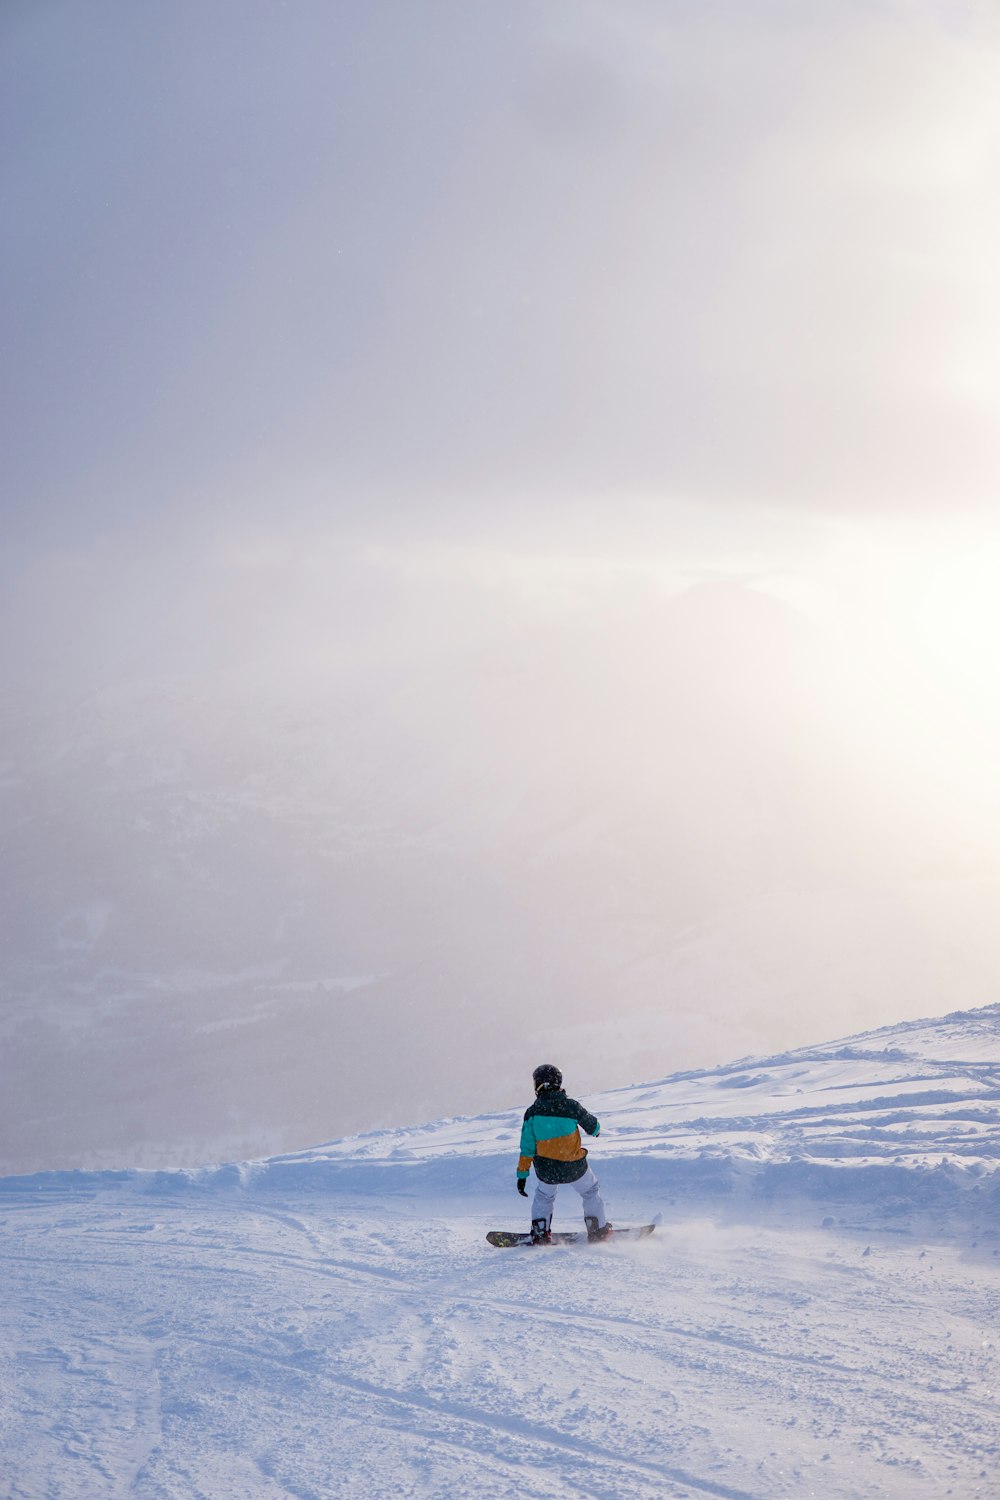 a person riding a snowboard down a snow covered slope